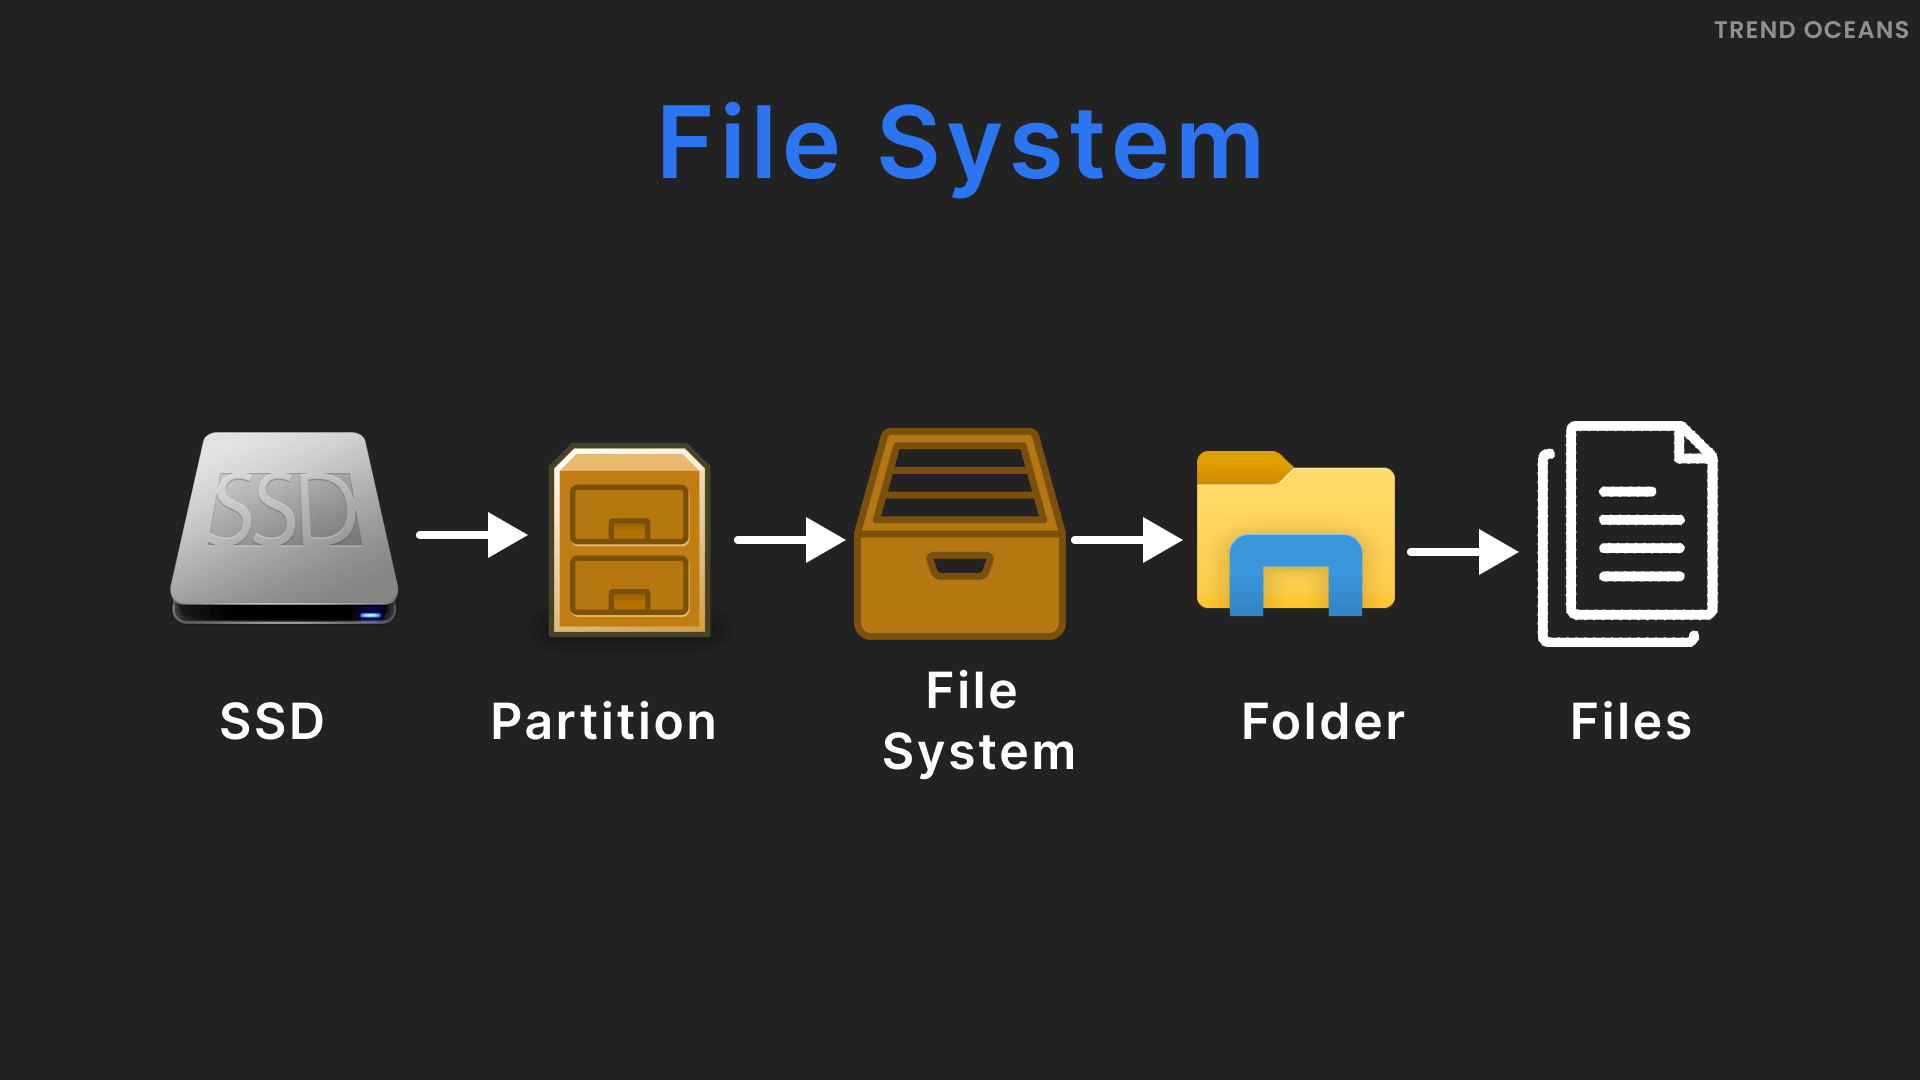 Linux File Systems